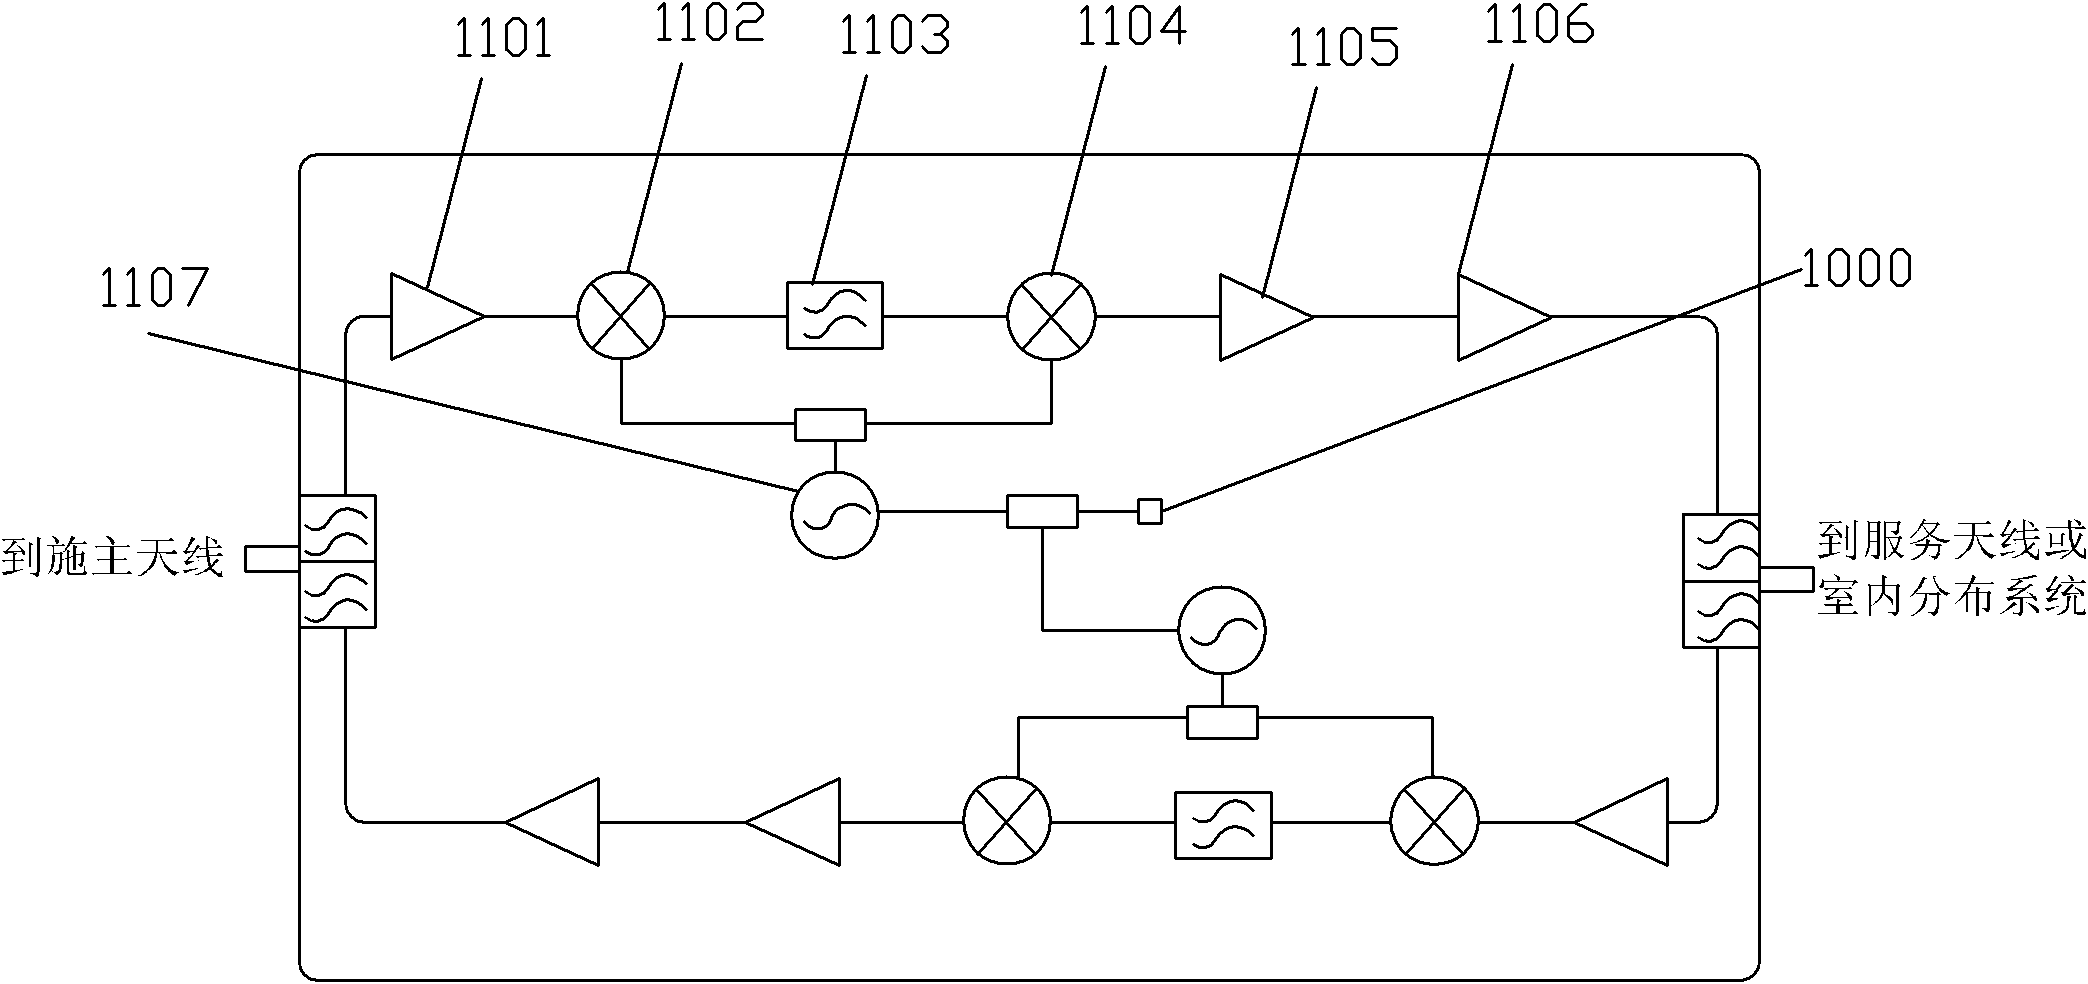 Multi-carrier/multiband frequency-selecting implementation method and circuit